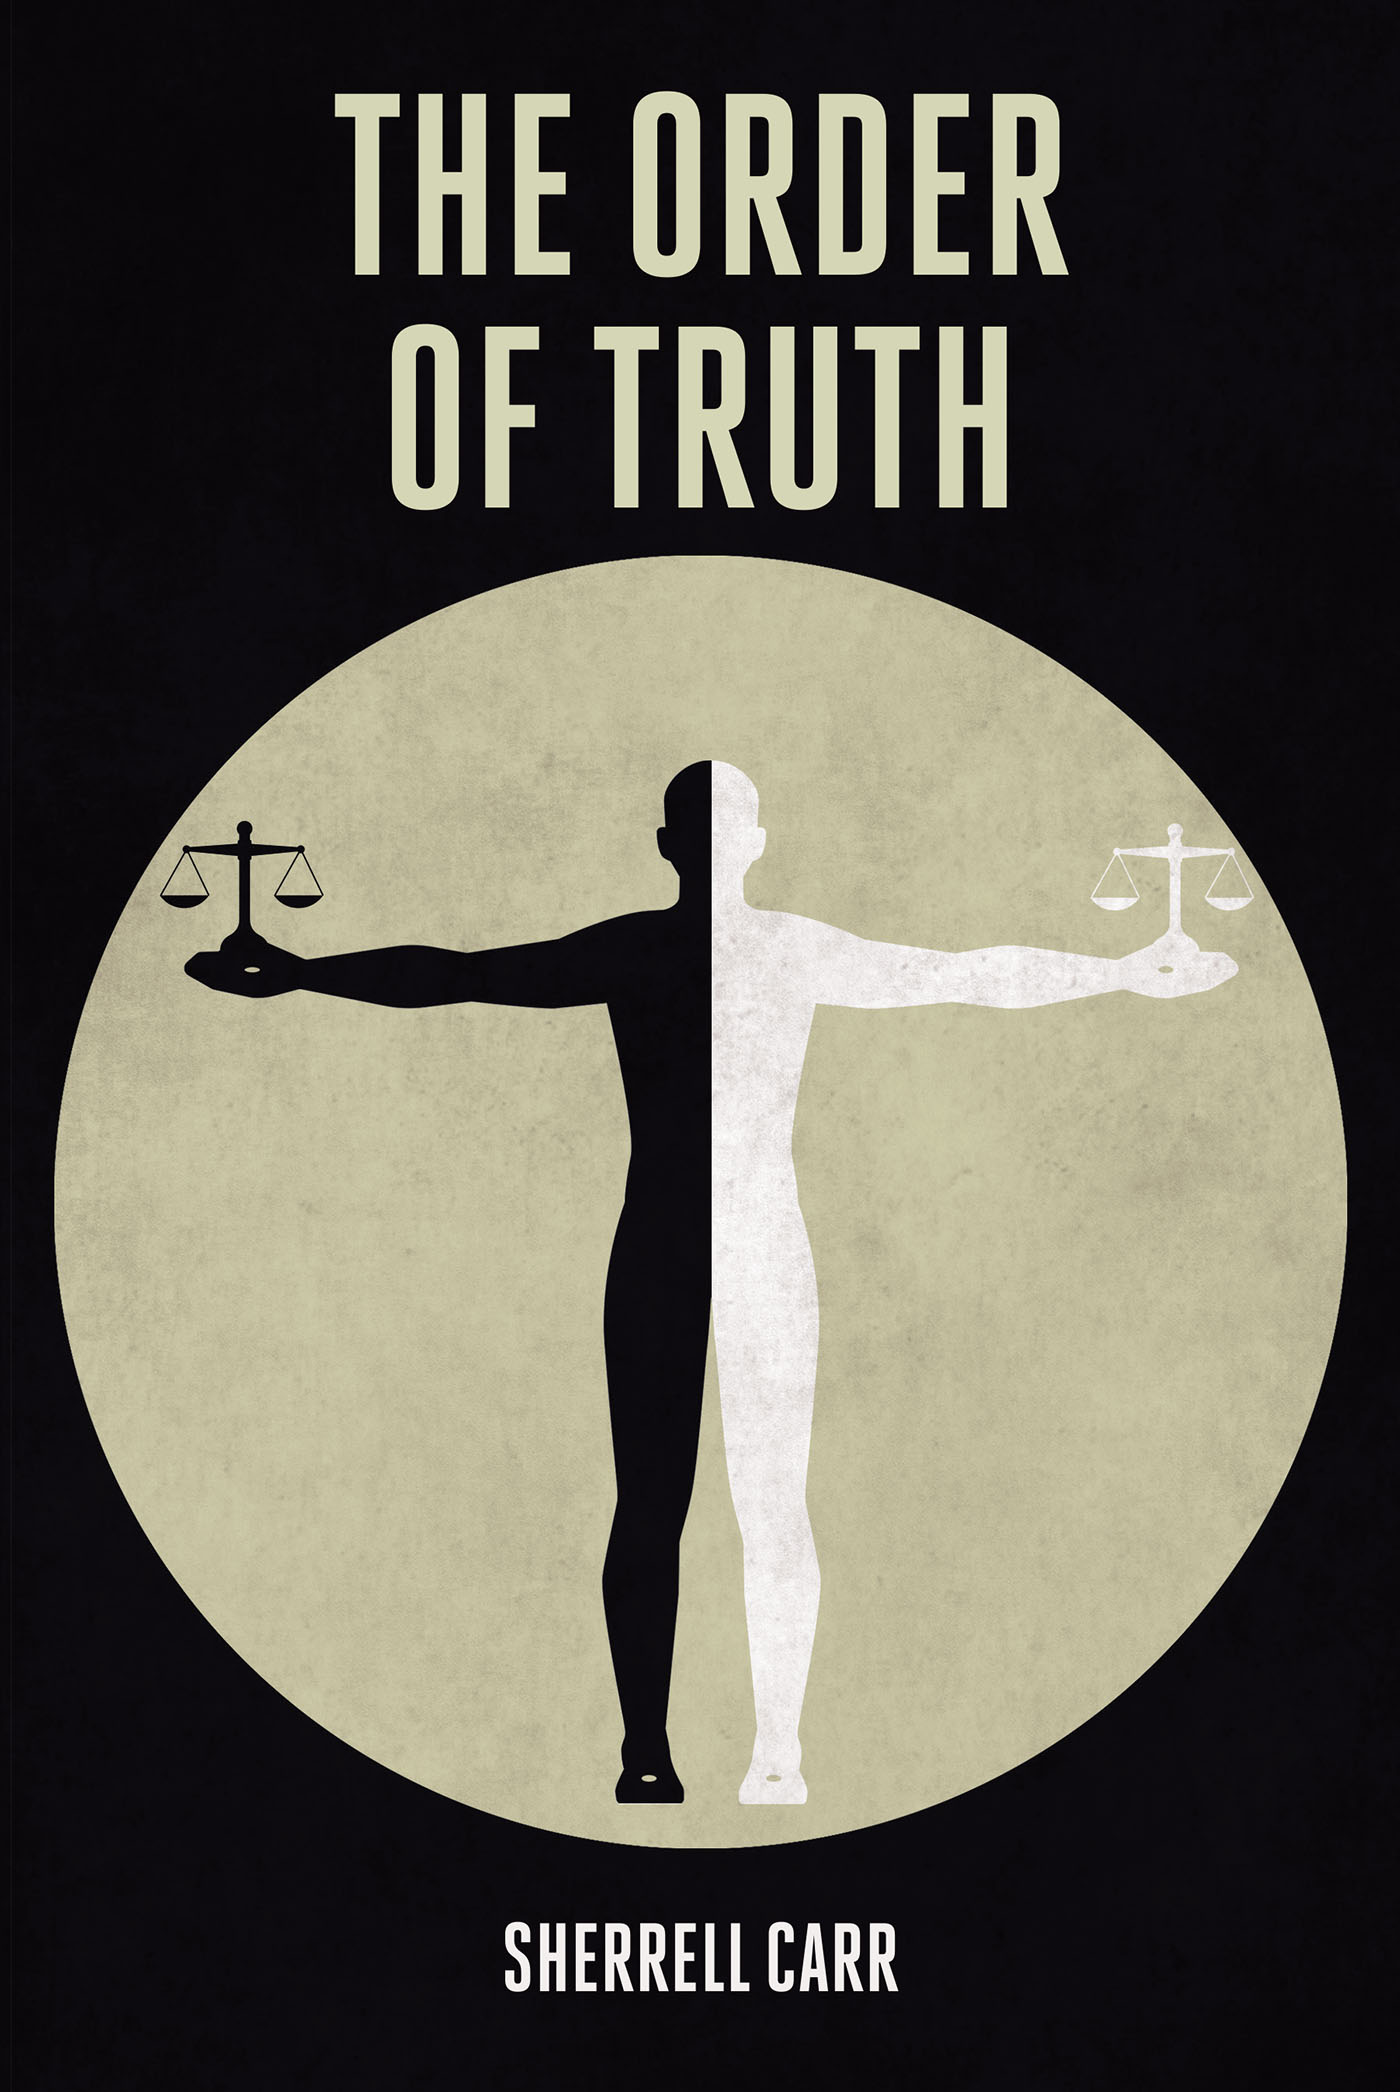 Sherrell Carr’s Newly Released "The Order Of Truth" is a Helpful Resource for Anyone Working to Develop a Stronger Connection with God